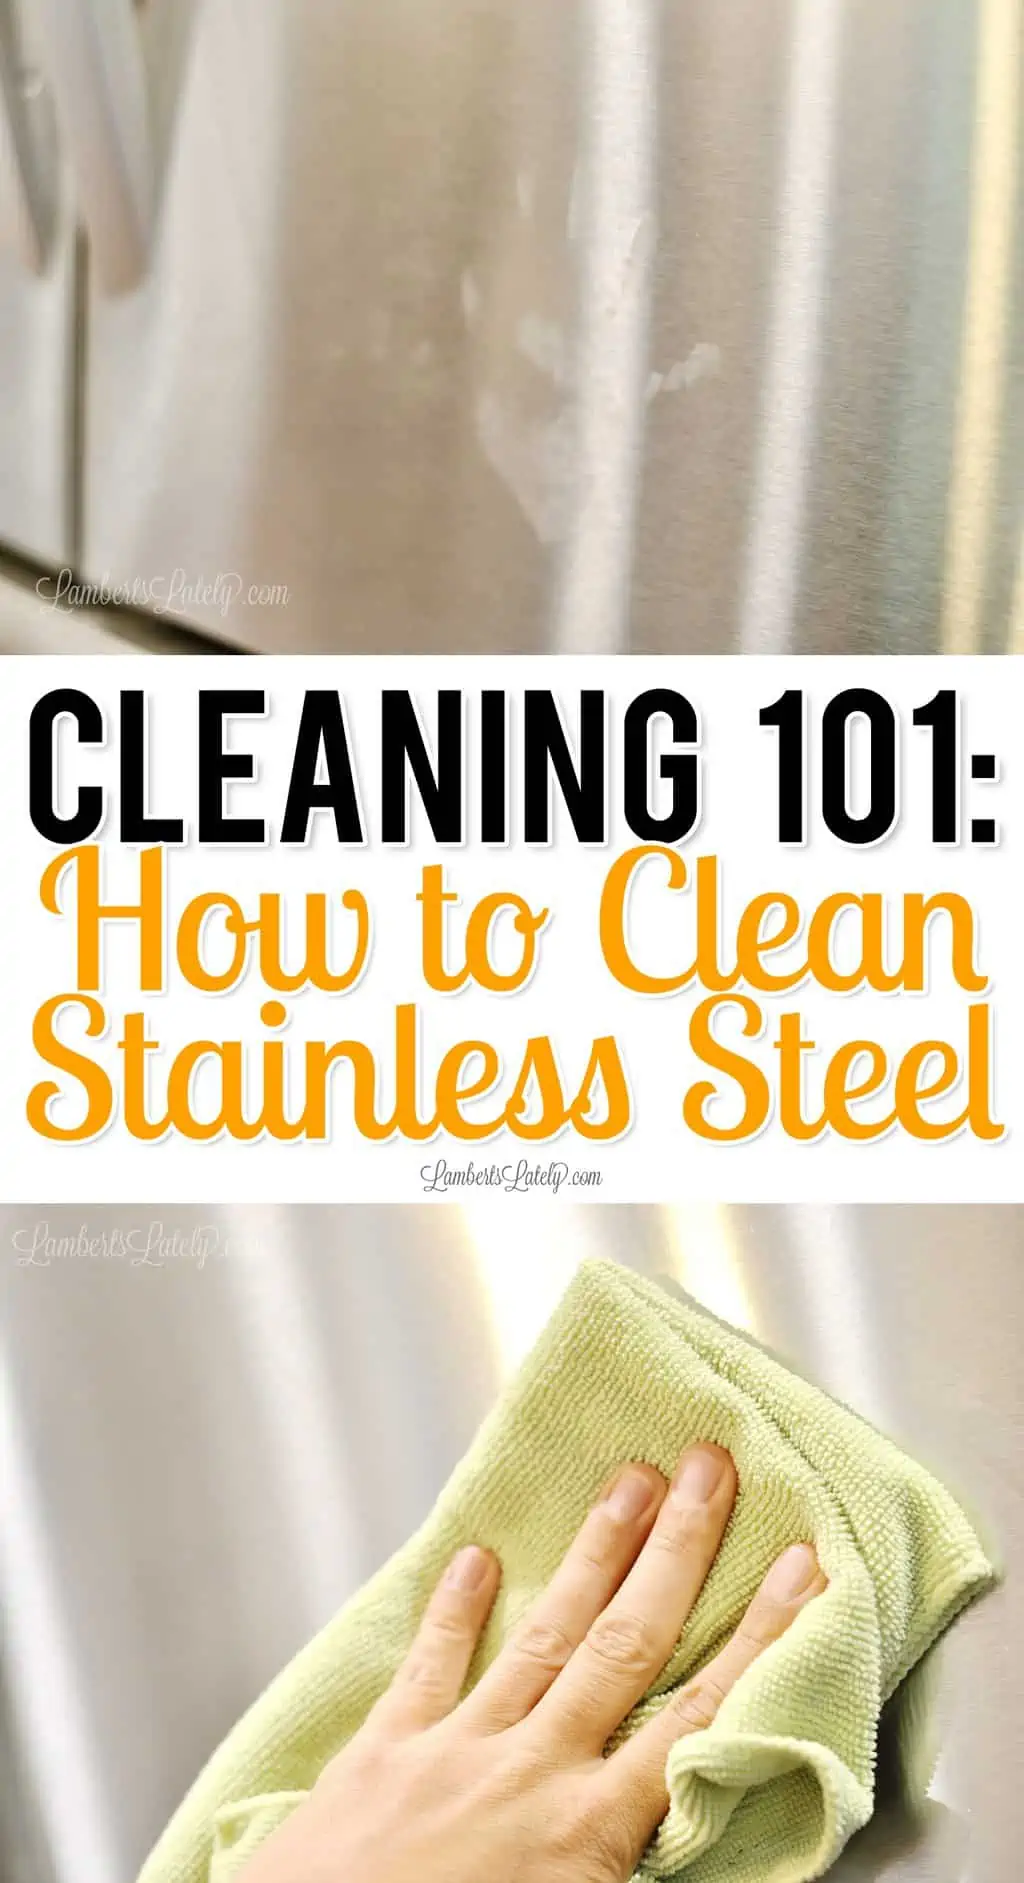 cleaning 101; how to clean stainless steel graphic